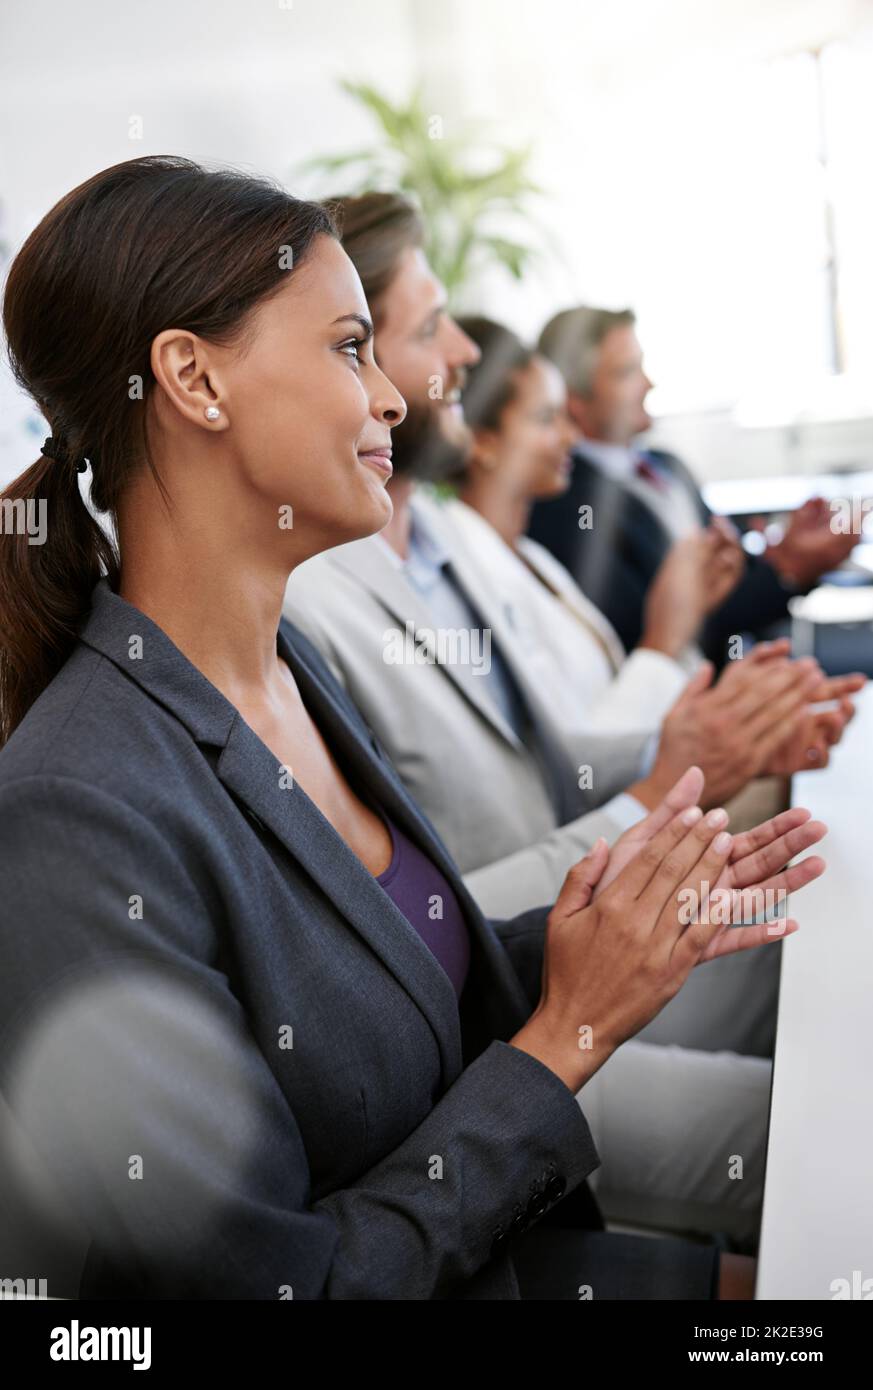 Showing their appreciation for an excellent business presentation. Shot a group of businesspeople applauding a business presentation. Stock Photo